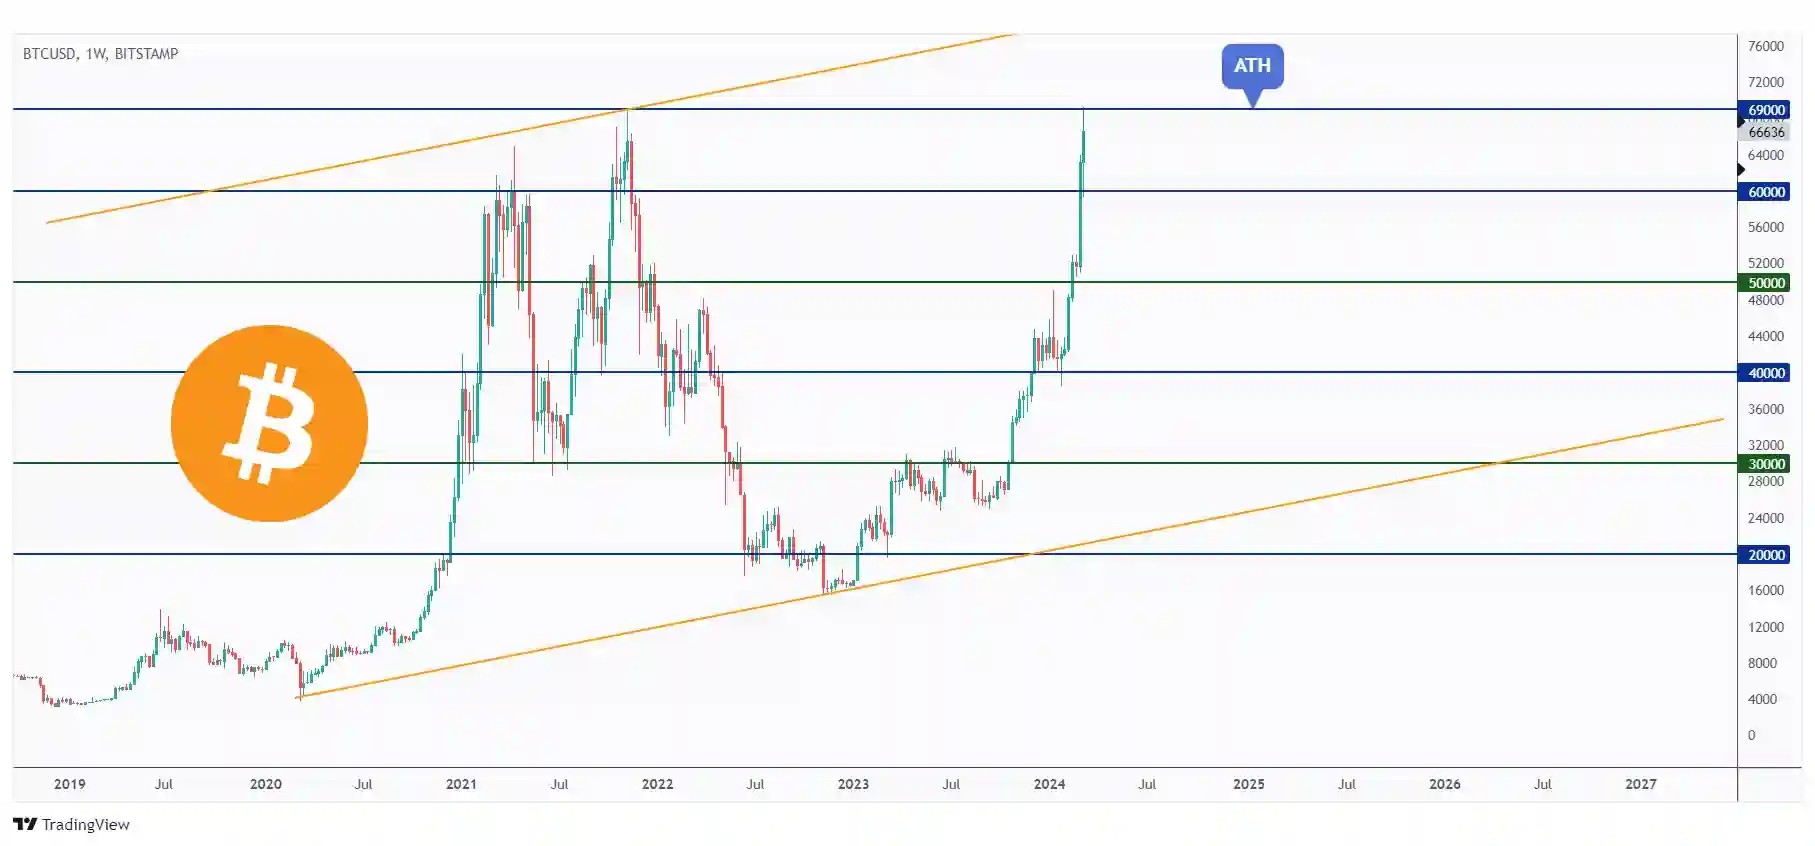 BTC weekly chart showing that BTC is hovering around the new all time high at 69,000.